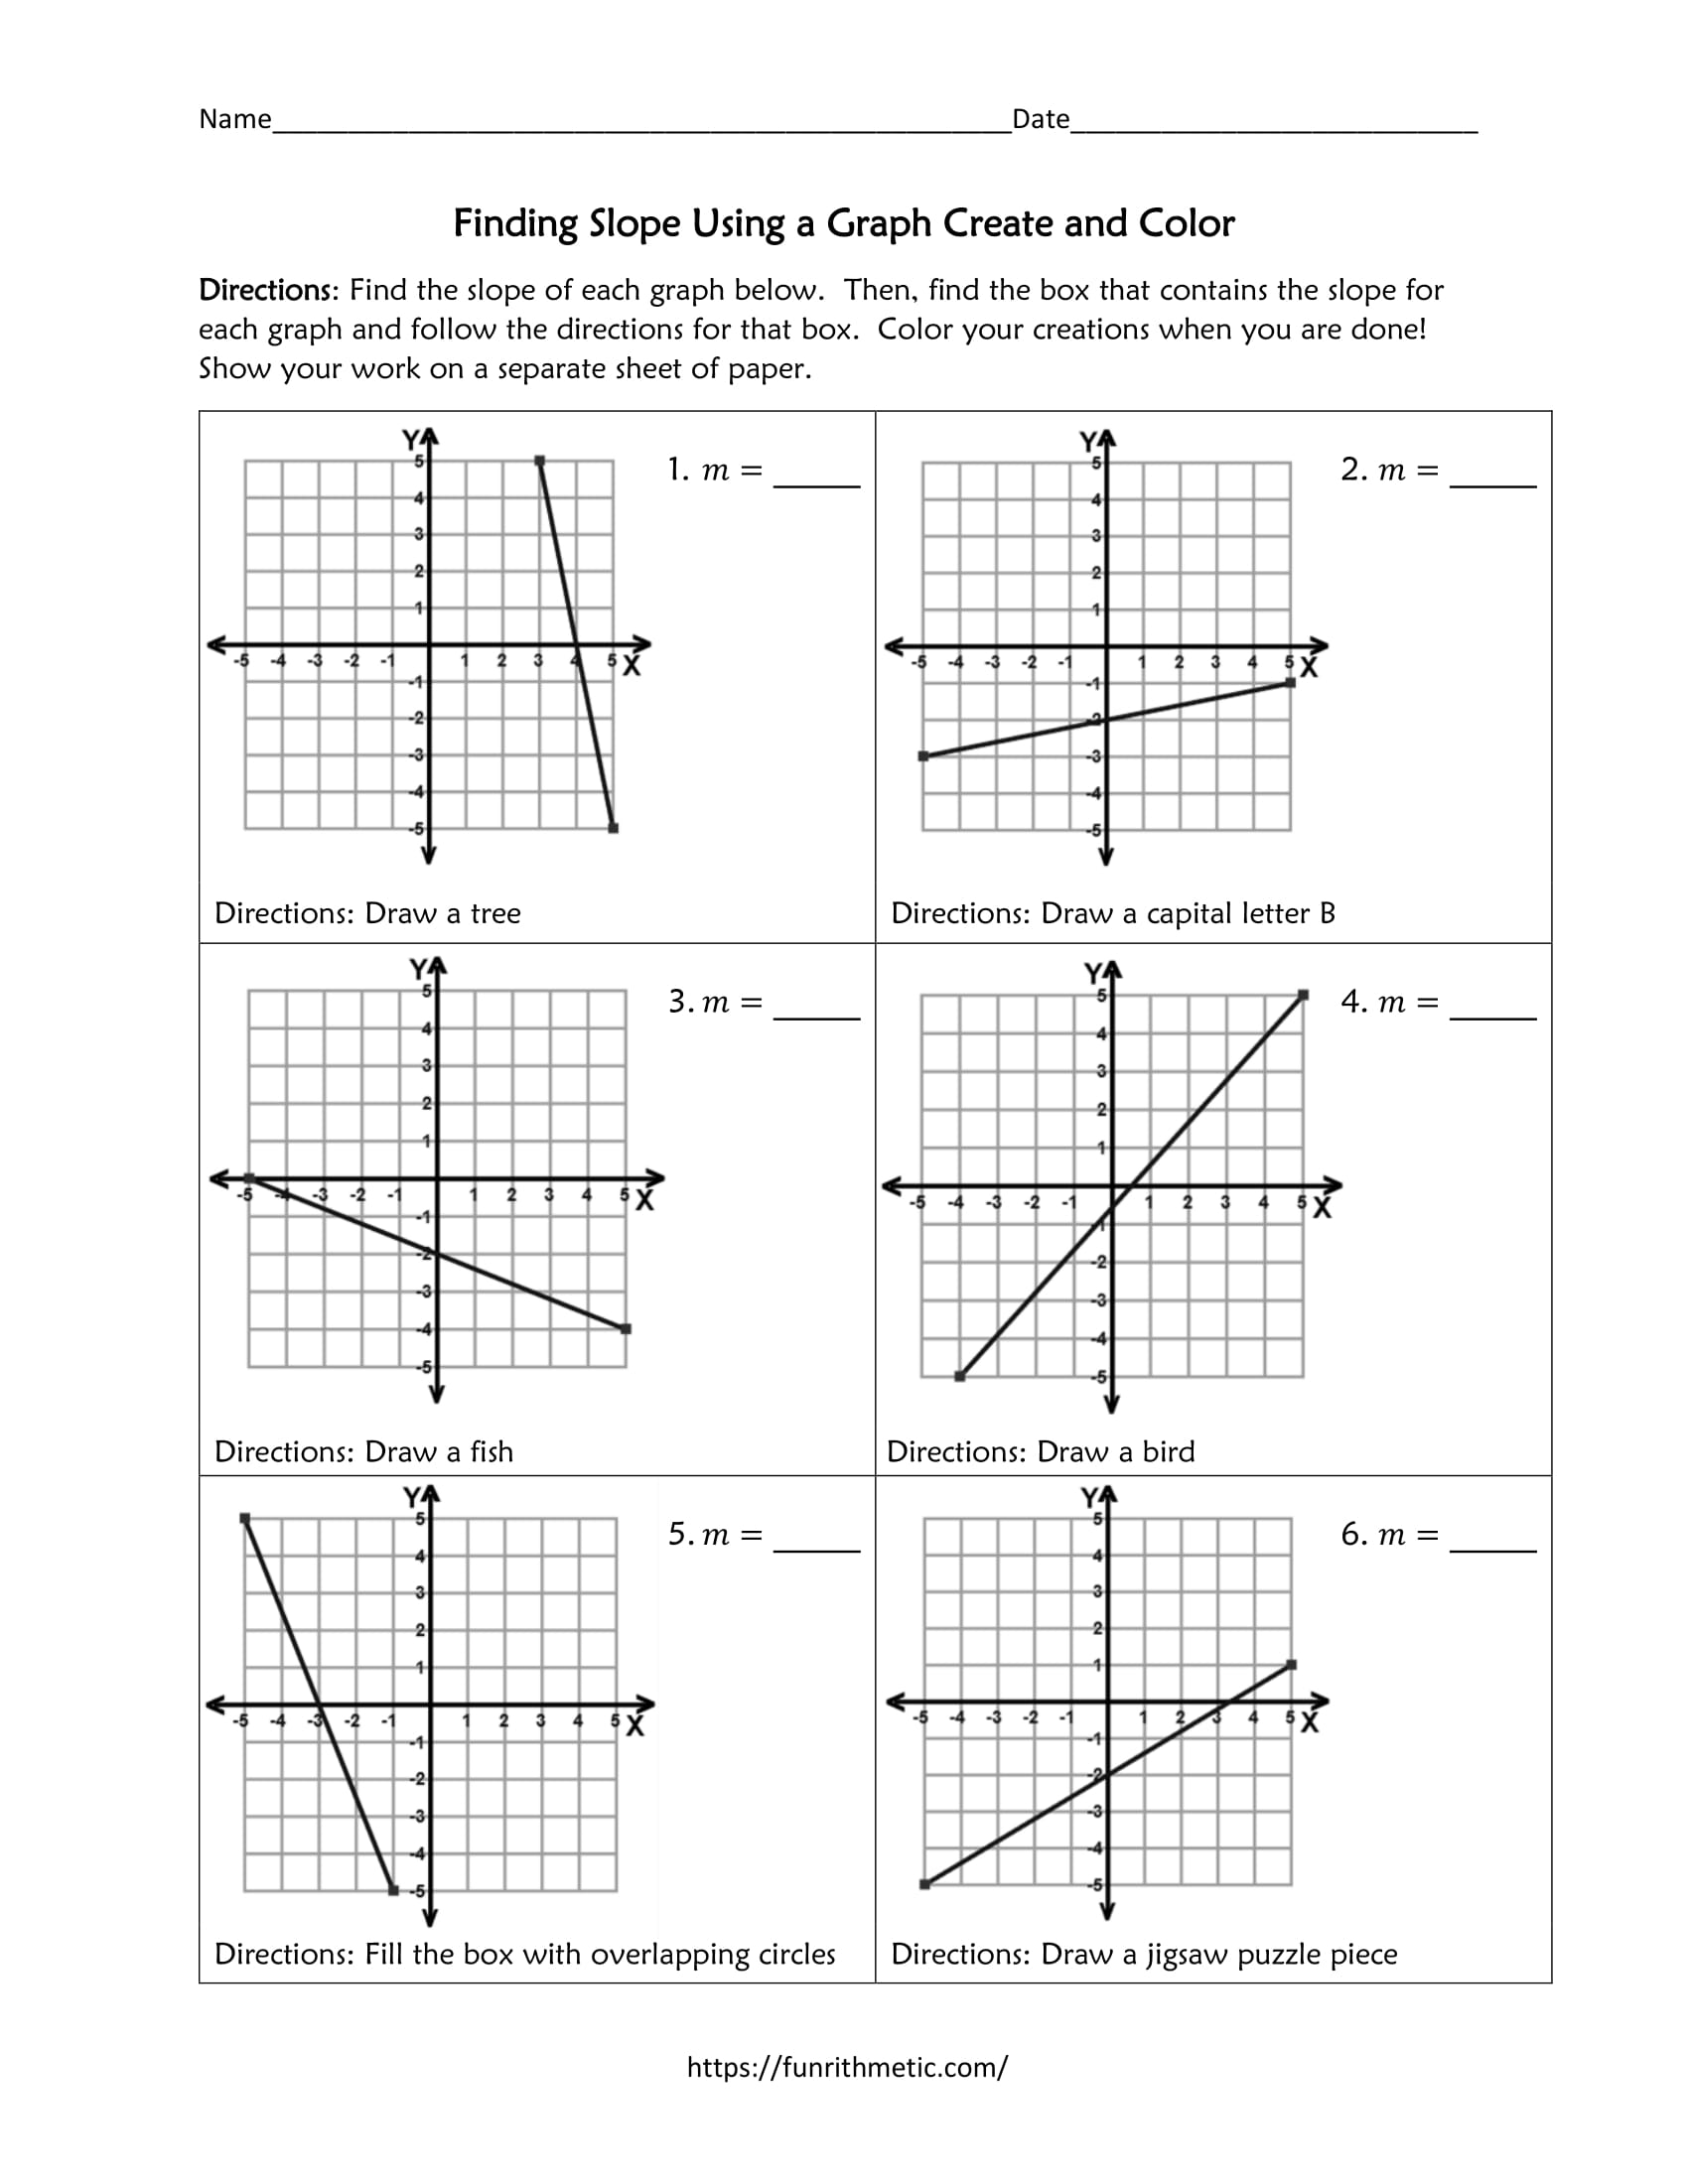 Finding Slope Using a Graph Create and Color With Find The Slope Worksheet